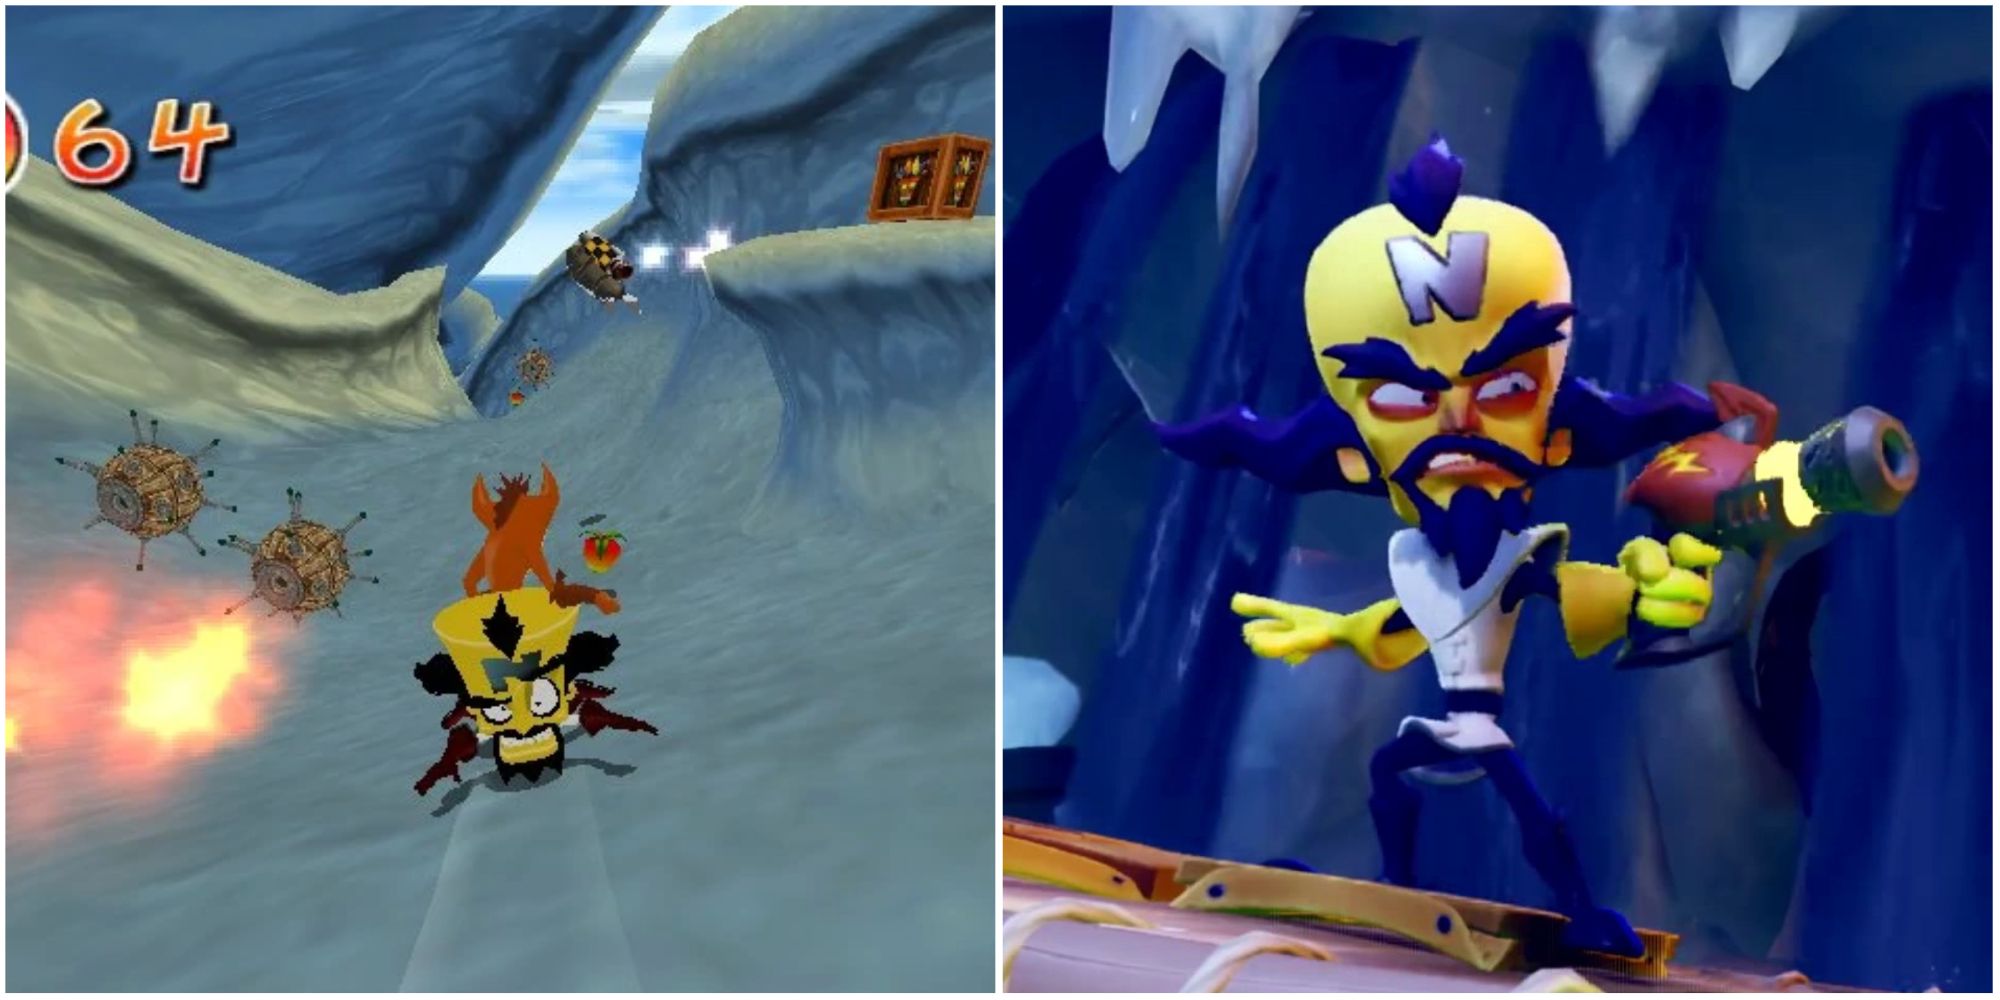 Cortex in Crash Twinsanity and Crash Bandicoot 4: It's About Time